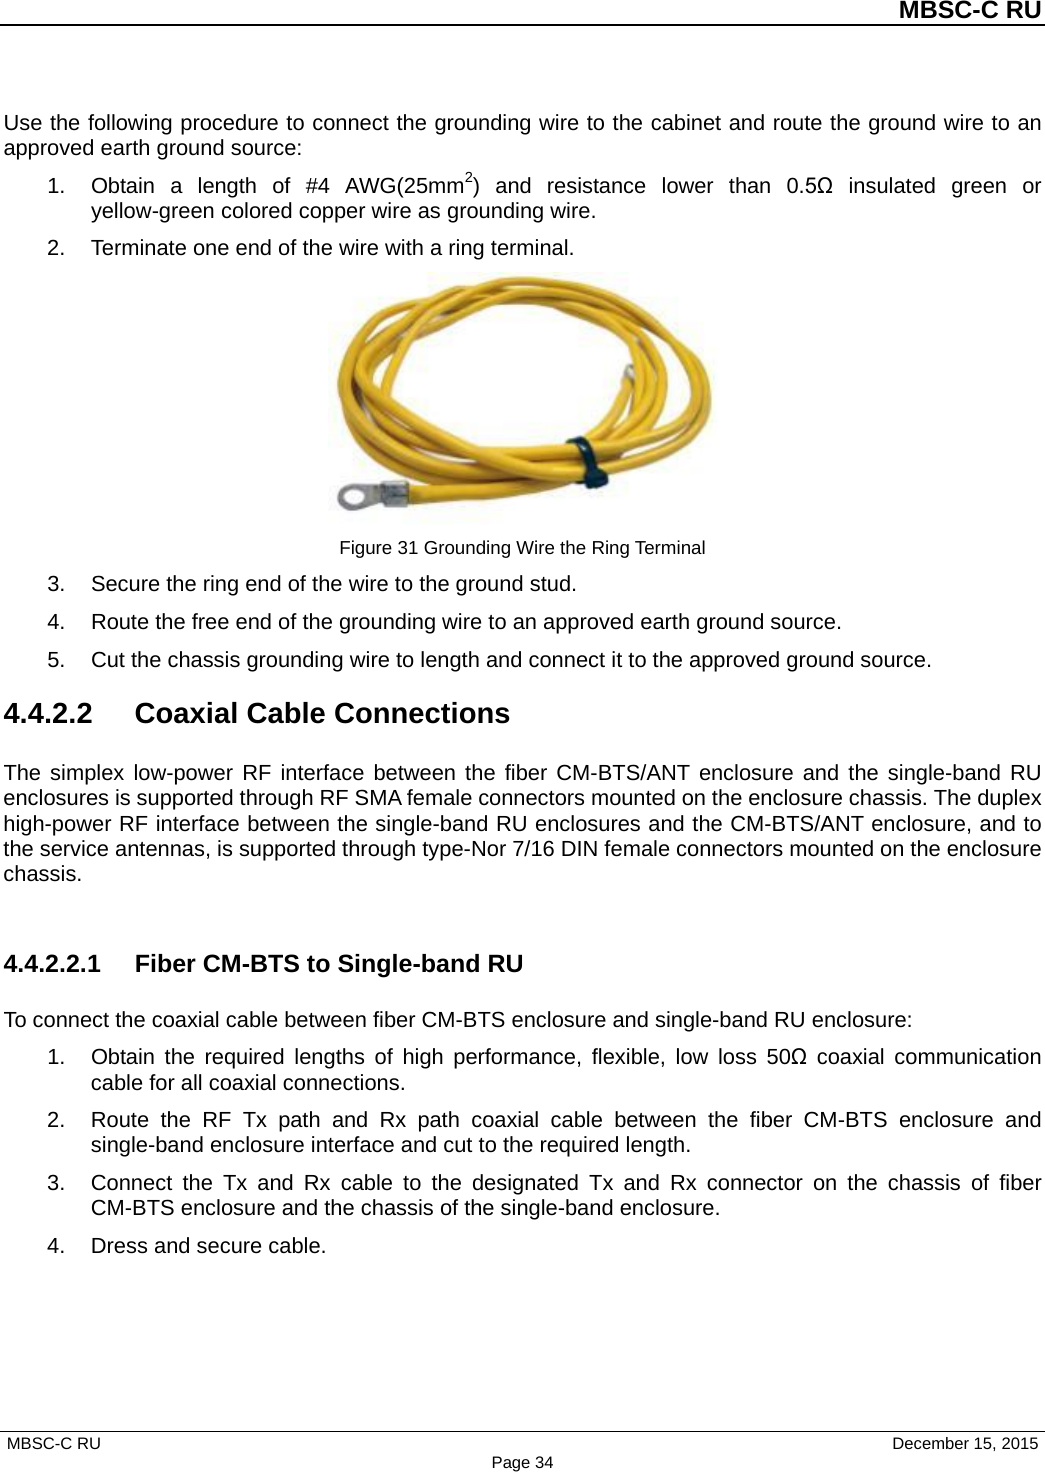          MBSC-C RU   MBSC-C RU                                     December 15, 2015 Page 34 Use the following procedure to connect the grounding wire to the cabinet and route the ground wire to an approved earth ground source: 1. Obtain a length of #4 AWG(25mm2)  and resistance  lower than  0.5Ω insulated green or yellow-green colored copper wire as grounding wire. 2. Terminate one end of the wire with a ring terminal.  Figure 31 Grounding Wire the Ring Terminal 3. Secure the ring end of the wire to the ground stud. 4. Route the free end of the grounding wire to an approved earth ground source. 5. Cut the chassis grounding wire to length and connect it to the approved ground source. 4.4.2.2 Coaxial Cable Connections The simplex low-power  RF interface between the fiber CM-BTS/ANT enclosure and the single-band  RU enclosures is supported through RF SMA female connectors mounted on the enclosure chassis. The duplex high-power RF interface between the single-band RU enclosures and the CM-BTS/ANT enclosure, and to the service antennas, is supported through type-Nor 7/16 DIN female connectors mounted on the enclosure chassis.  4.4.2.2.1 Fiber CM-BTS to Single-band RU To connect the coaxial cable between fiber CM-BTS enclosure and single-band RU enclosure: 1. Obtain the required lengths of high performance, flexible, low loss 50Ω coaxial communication cable for all coaxial connections. 2. Route the RF Tx path and Rx path coaxial cable between the fiber CM-BTS enclosure and single-band enclosure interface and cut to the required length.   3. Connect the Tx and Rx cable to the designated Tx and Rx connector on the chassis of fiber CM-BTS enclosure and the chassis of the single-band enclosure. 4. Dress and secure cable.  